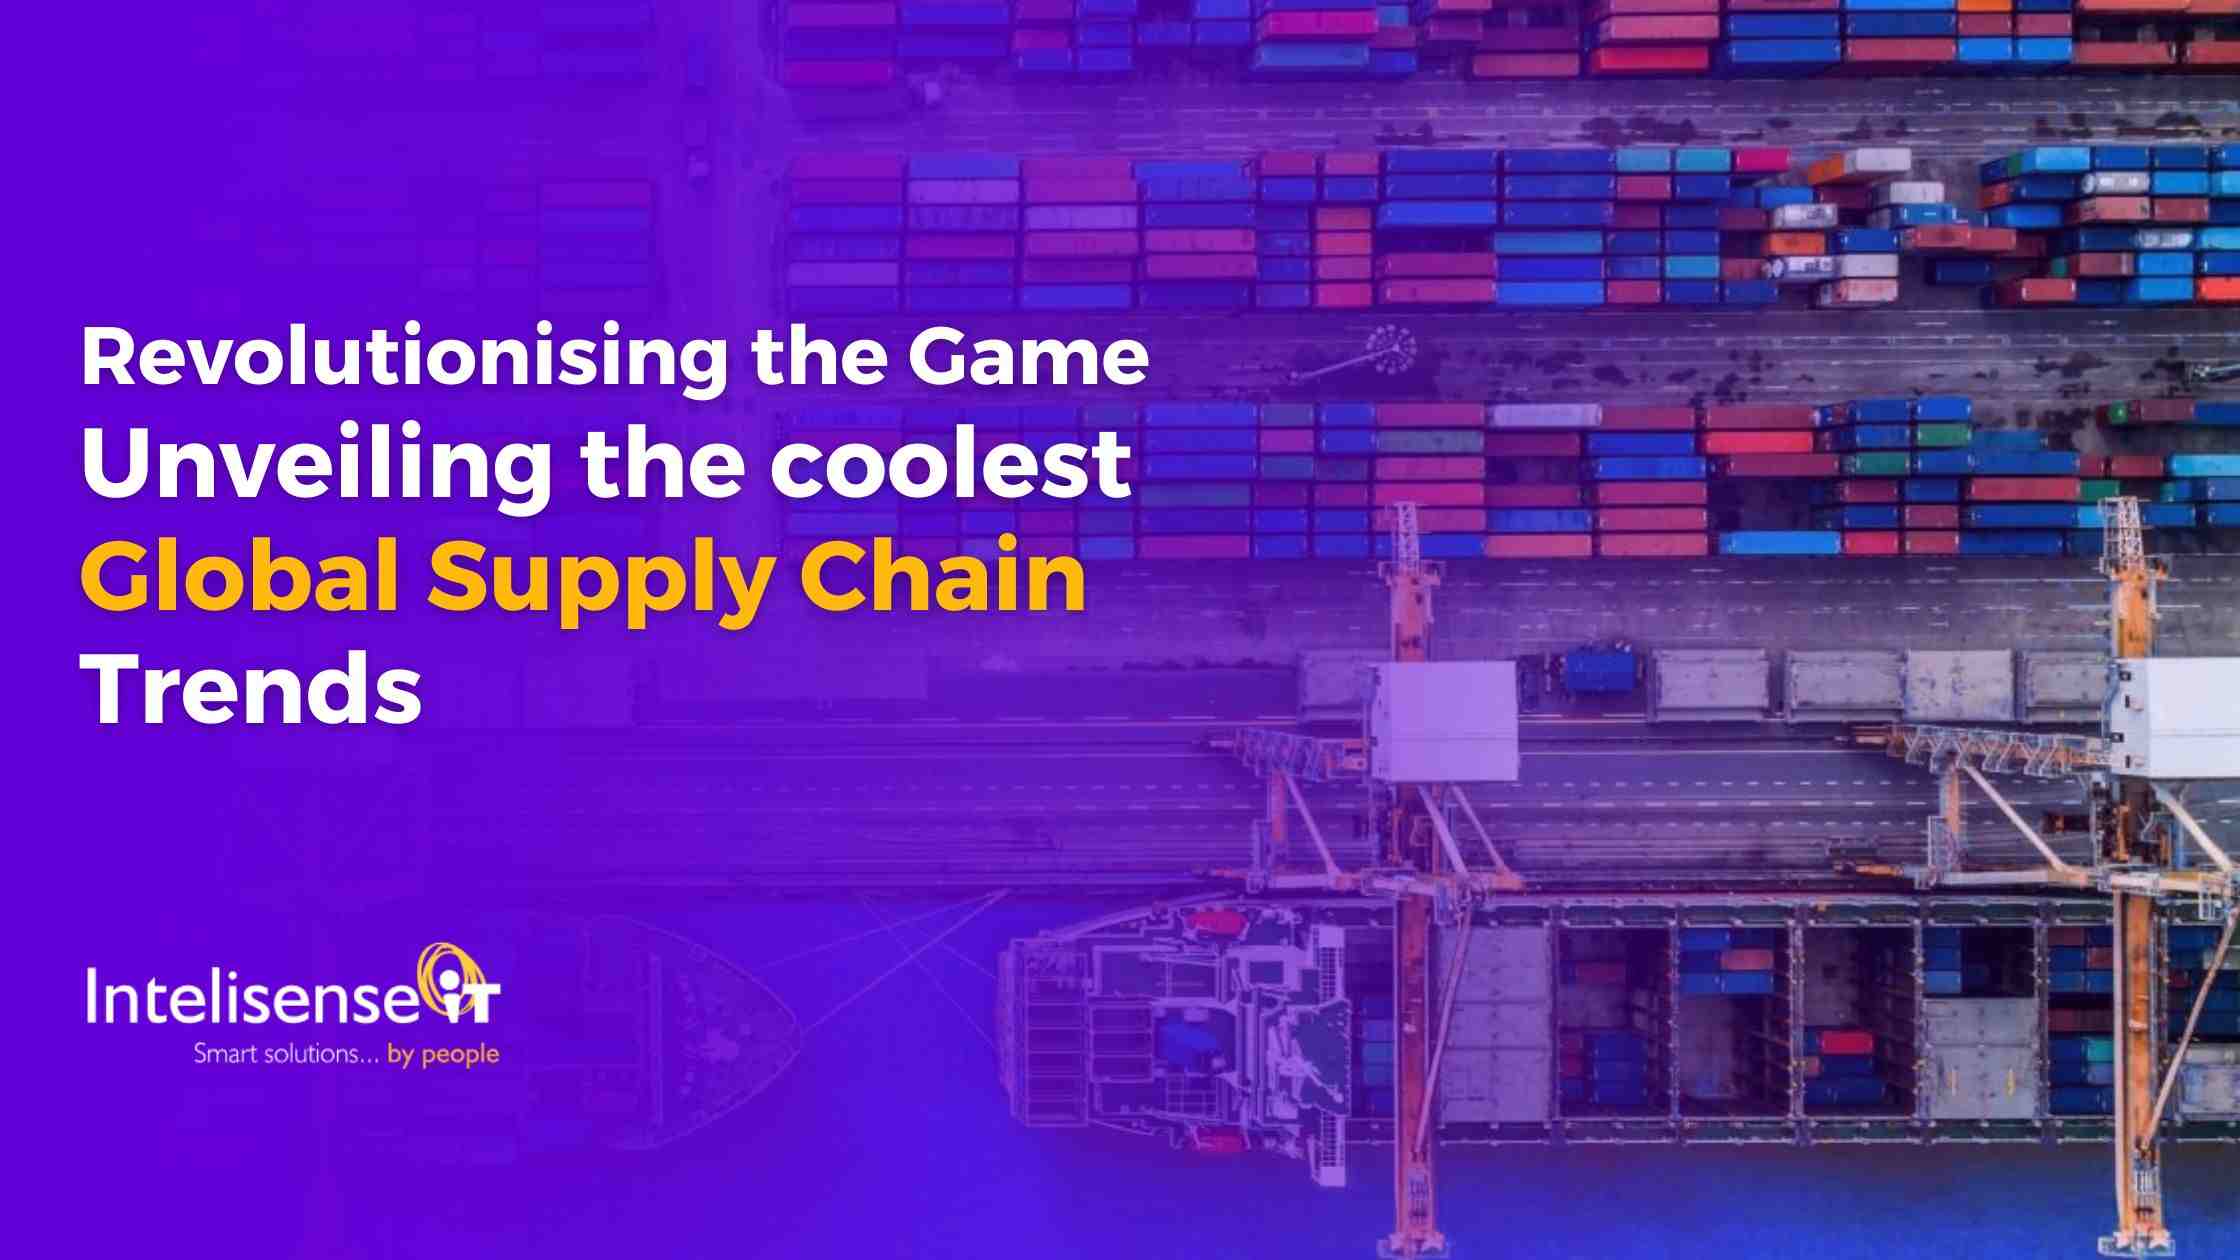 Global Supply Chain Trends